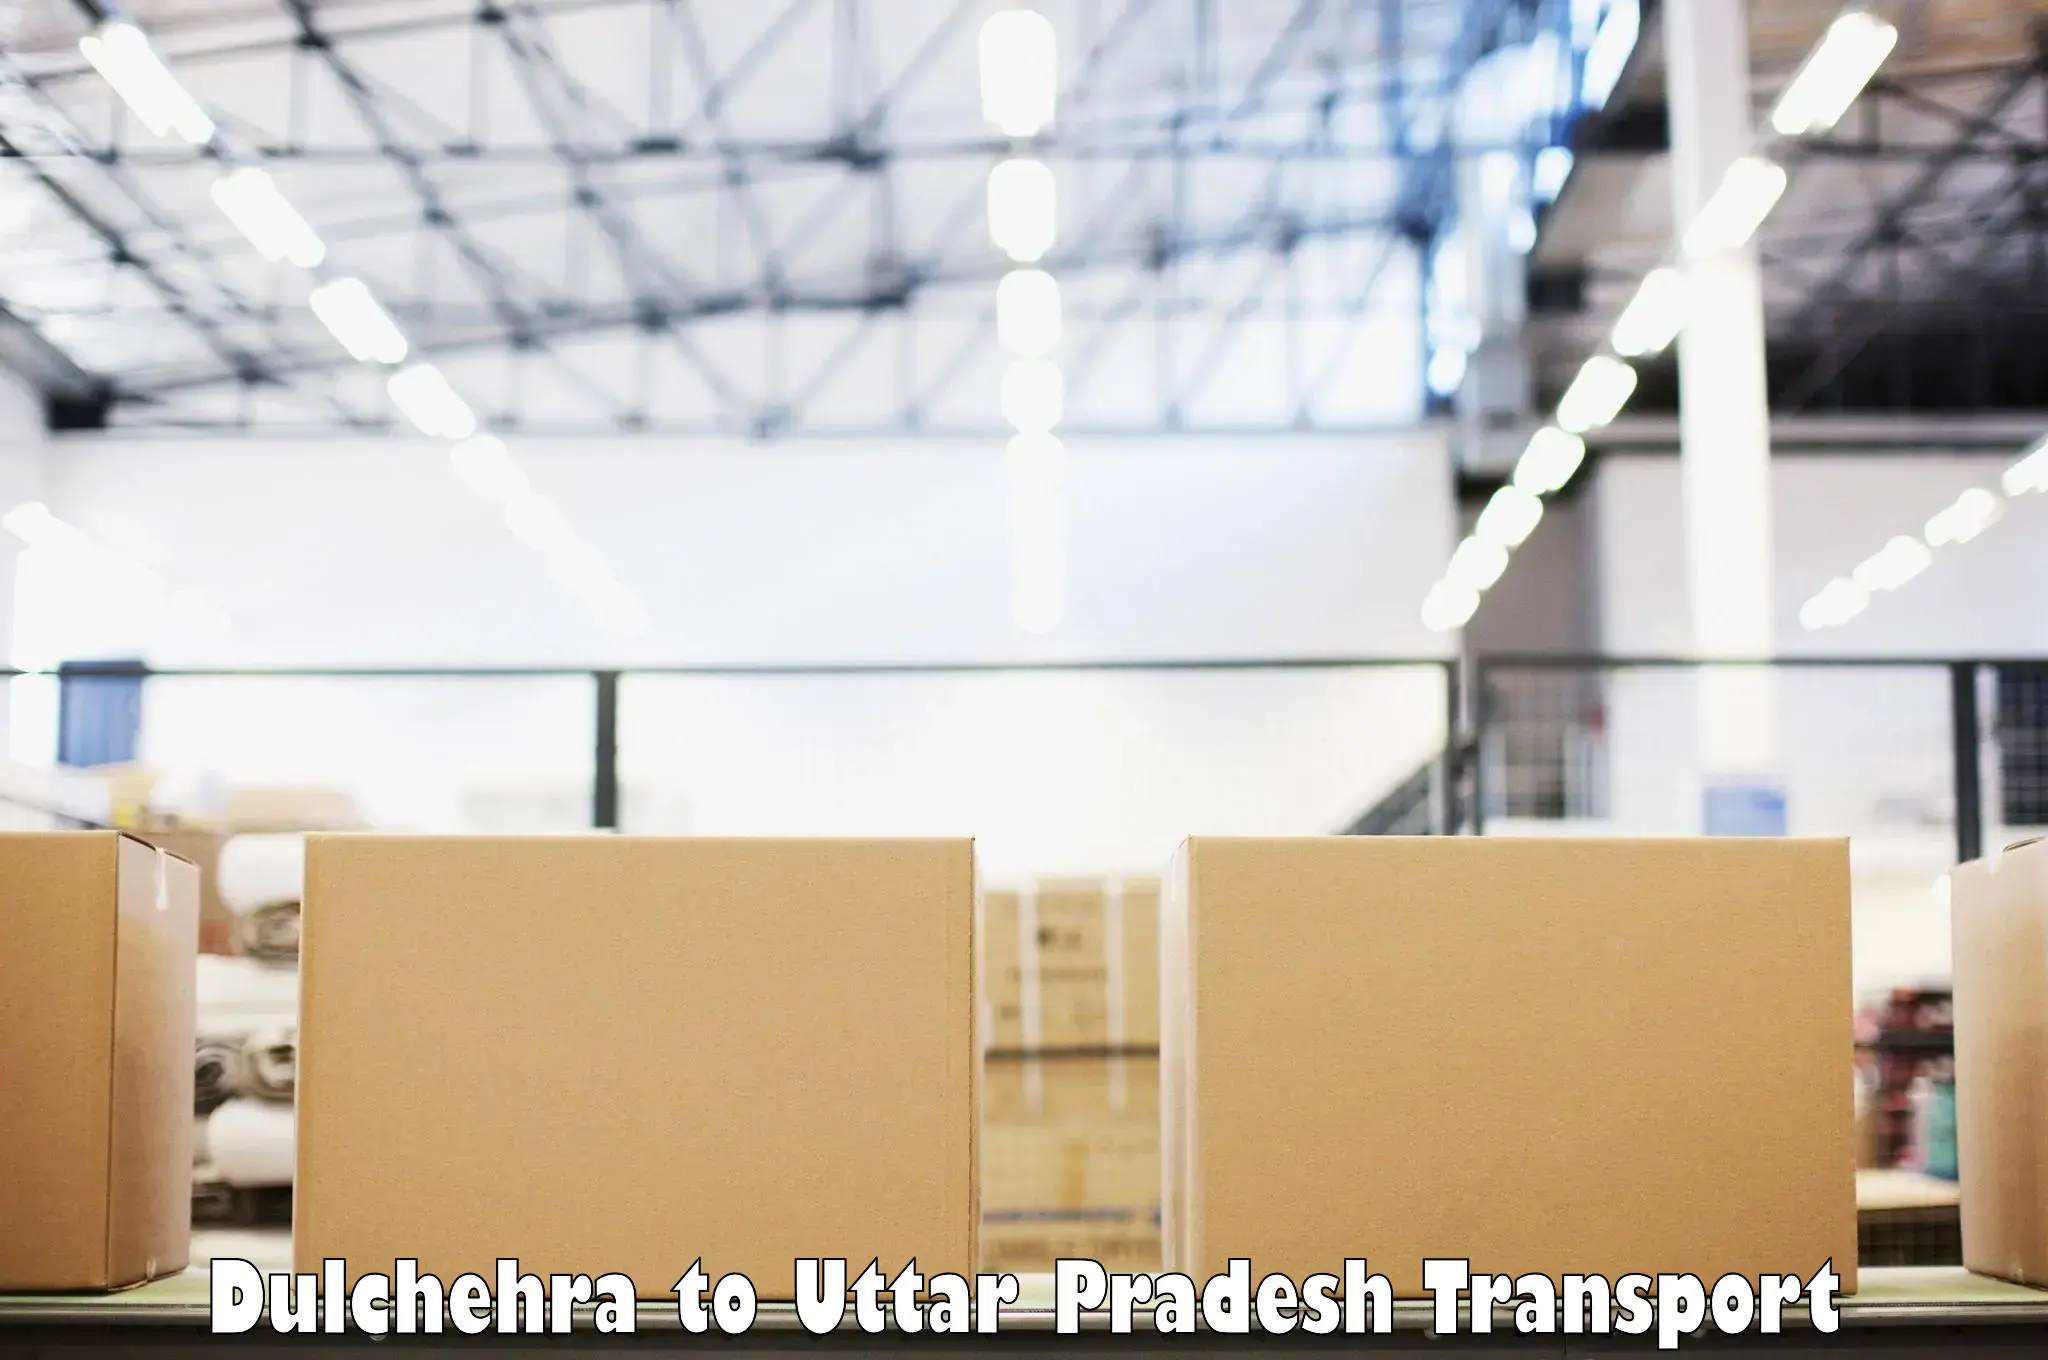 Luggage transport services in Dulchehra to Shahabad